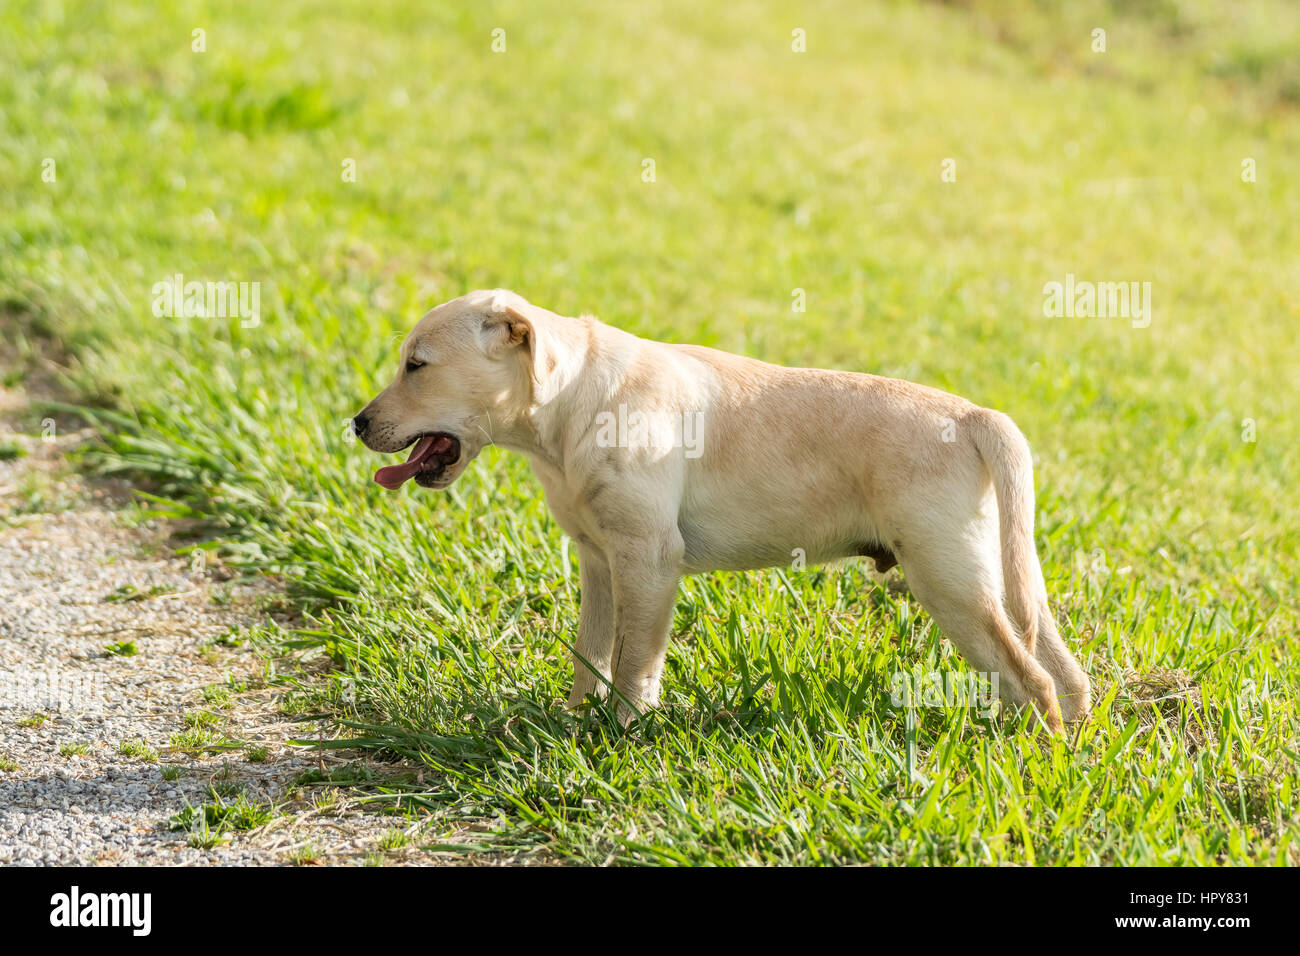 A yellow Labrador puppy yawning tiredly after a big day playing in a grassy park. Stock Photo